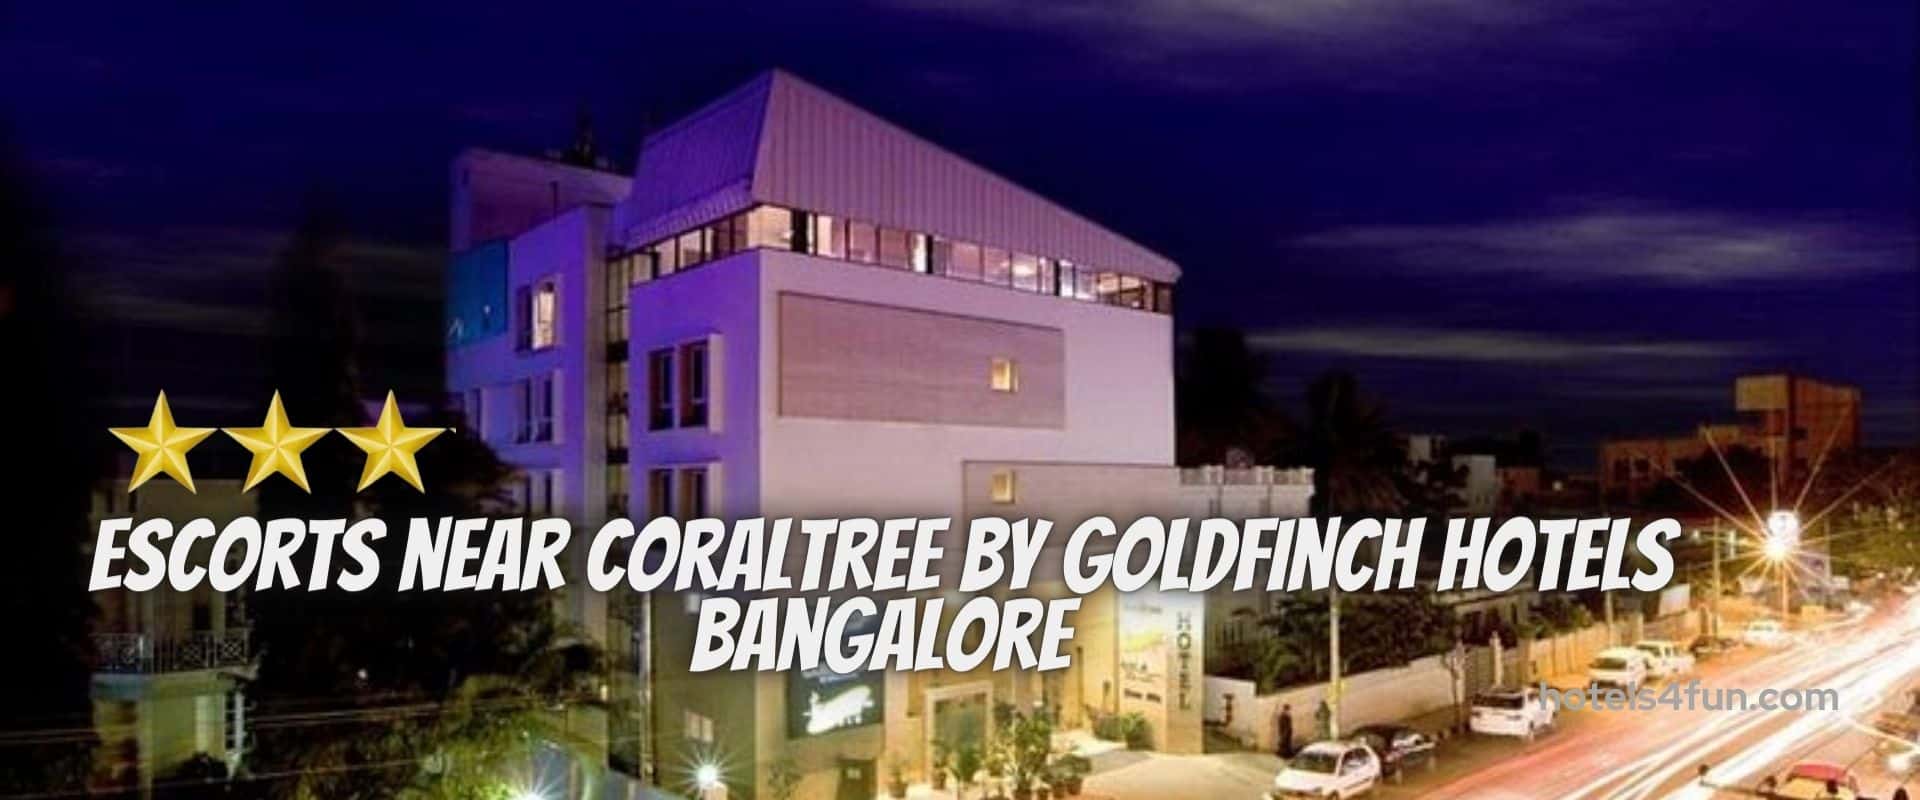 Coraltree by Goldfinch Hotel Bangalore